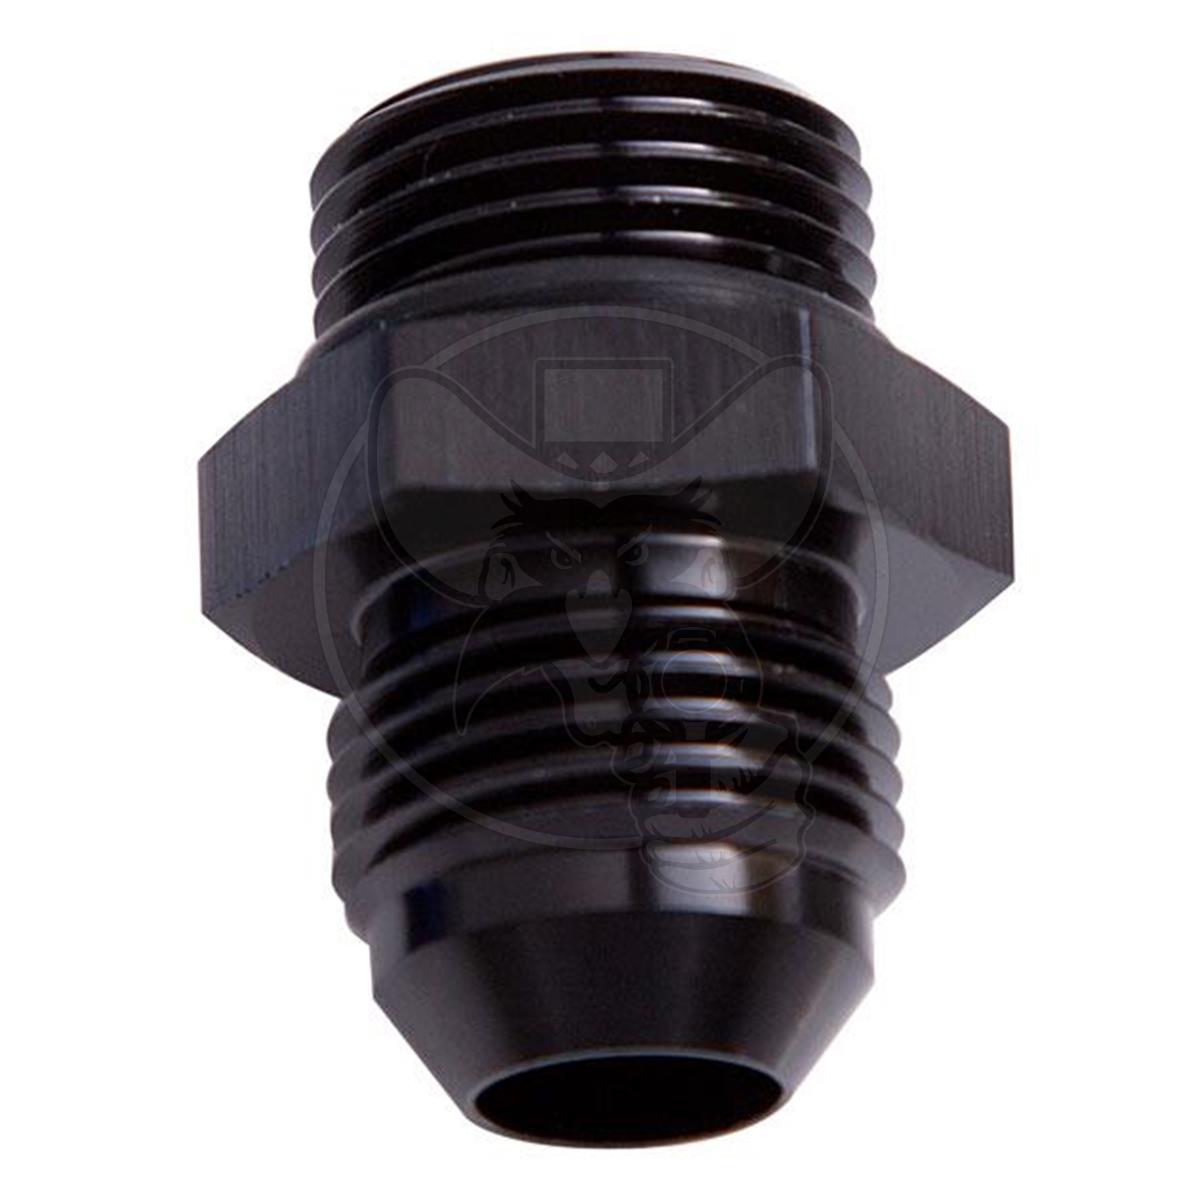 Aeroflow -8 ORB to -8AN Straight Male Flare Adapter - Black